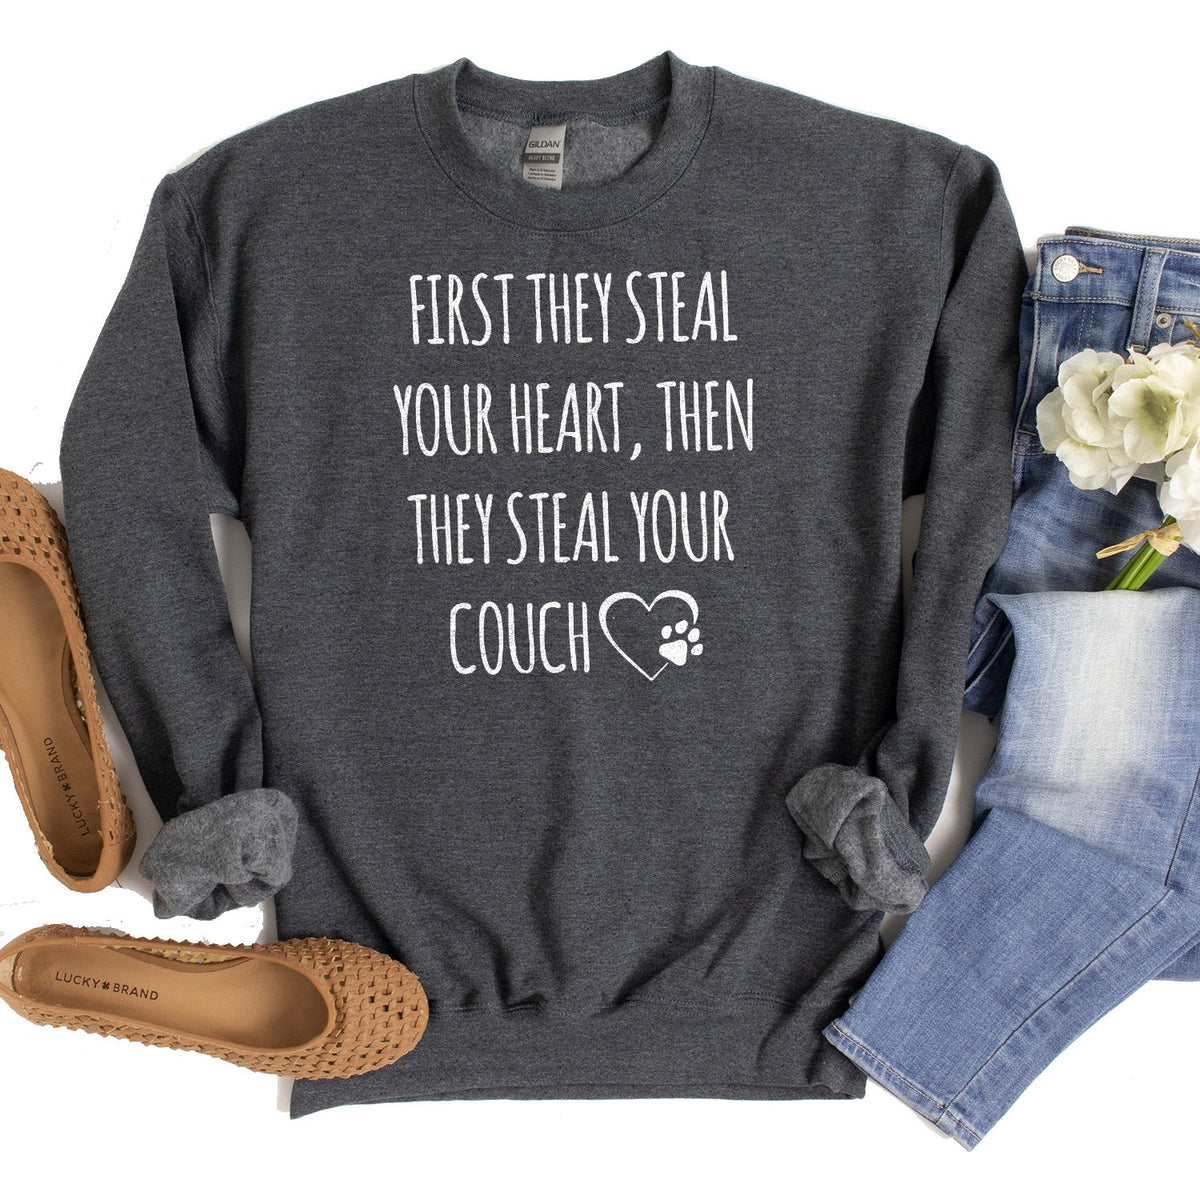 First They Steal Your Heart, Then They Steal Your Couch - Long Sleeve Heavy Crewneck Sweatshirt